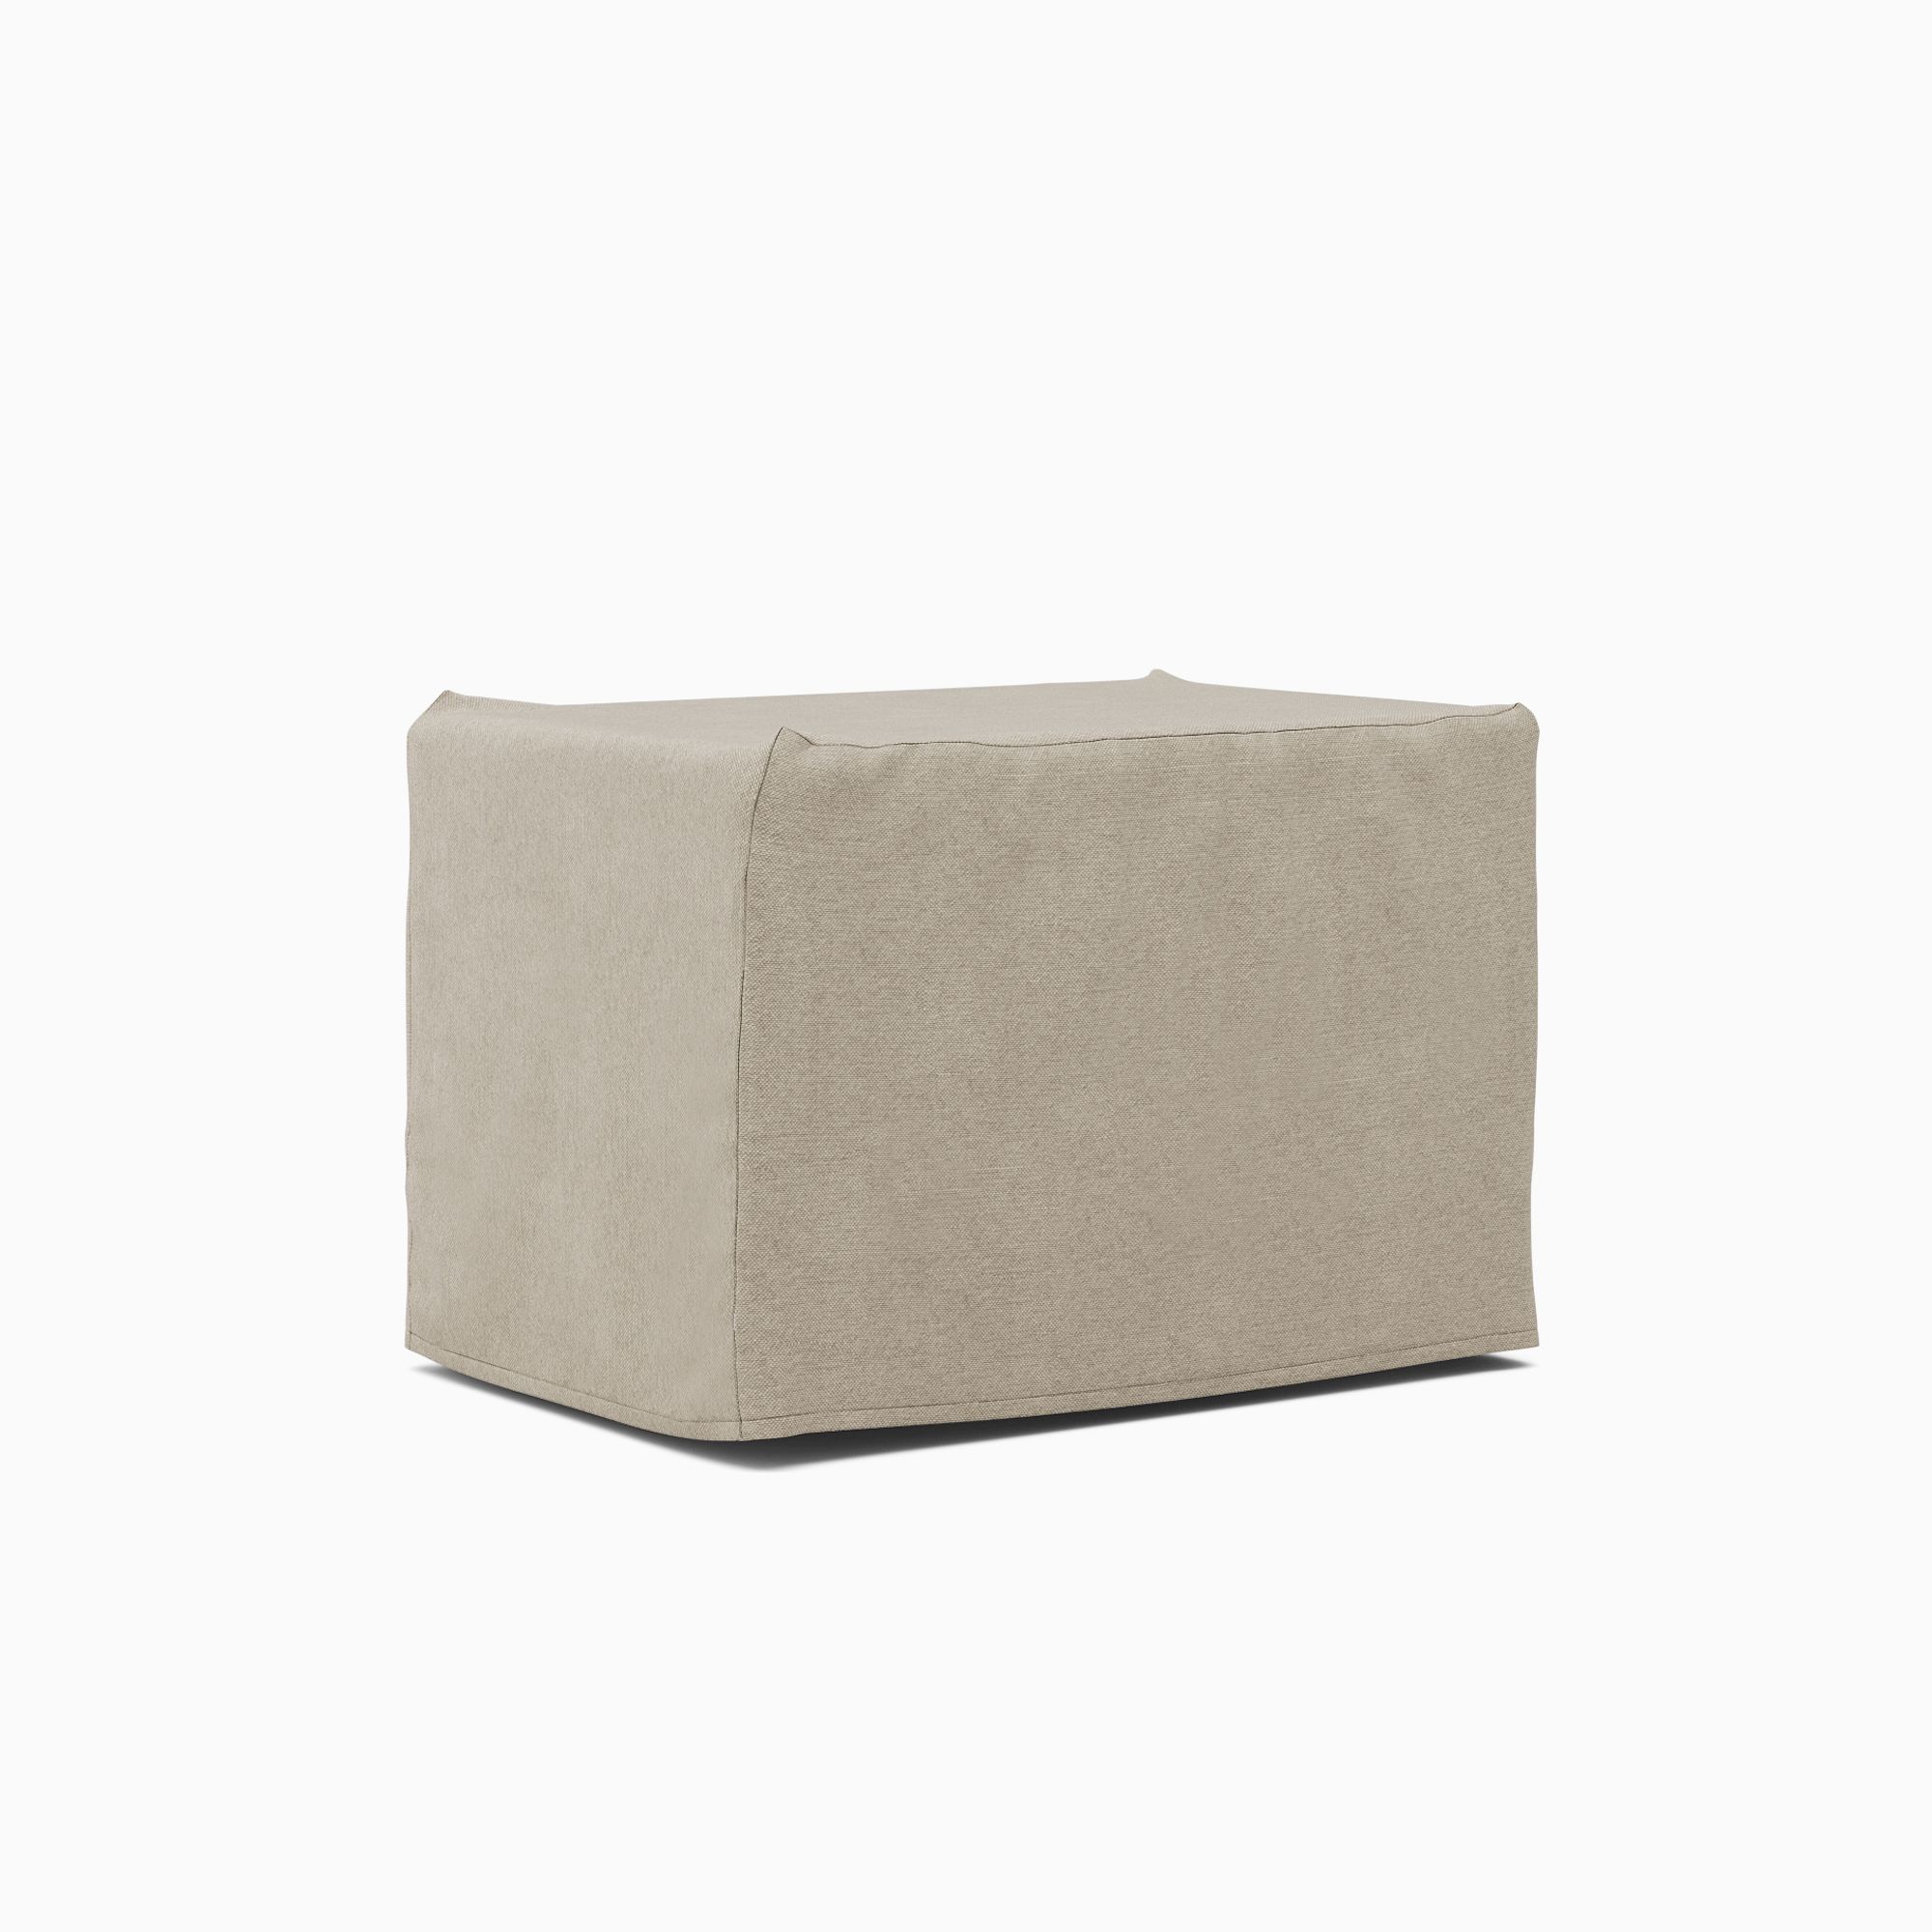 Telluride Outdoor Side Table Protective Cover | West Elm